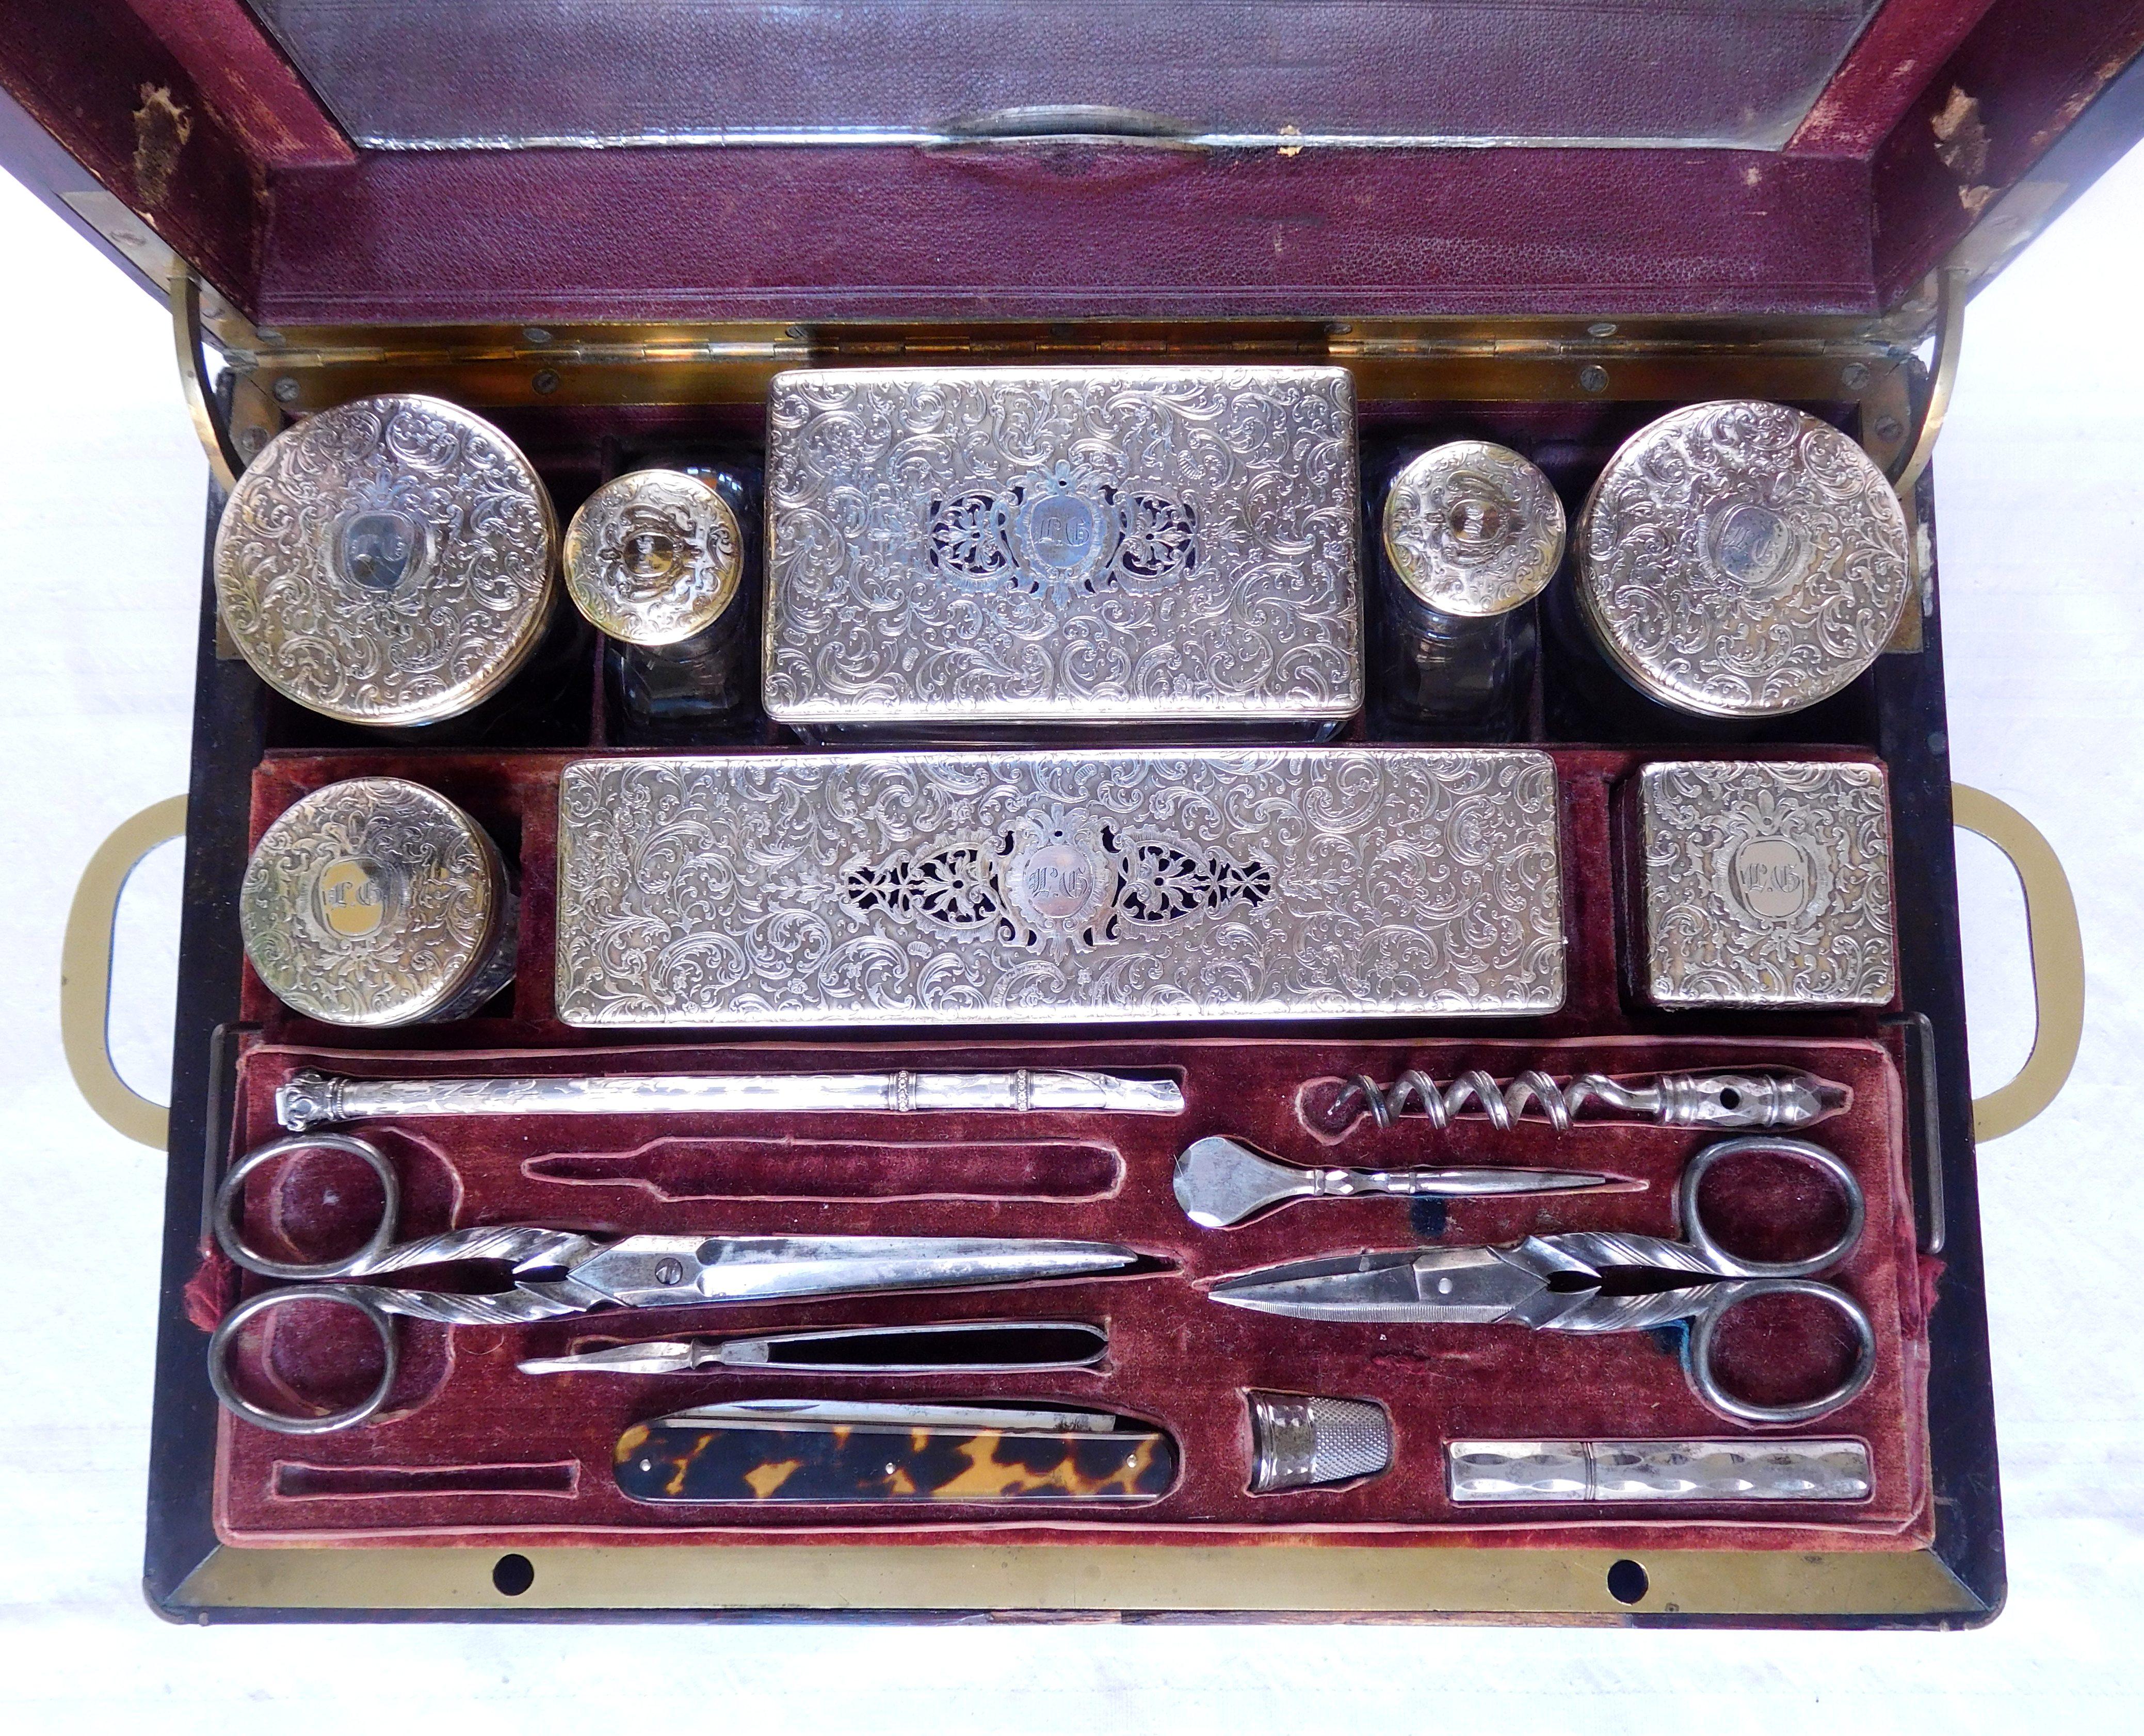 Luxurious travel set for a gentleman or an officer, French 19th century production (Napoléon III, circa 1850).

A number of accessories among which :
- a mercury mirror in the cover
- crystal and solid silver boxes and perfume bottles
- writing